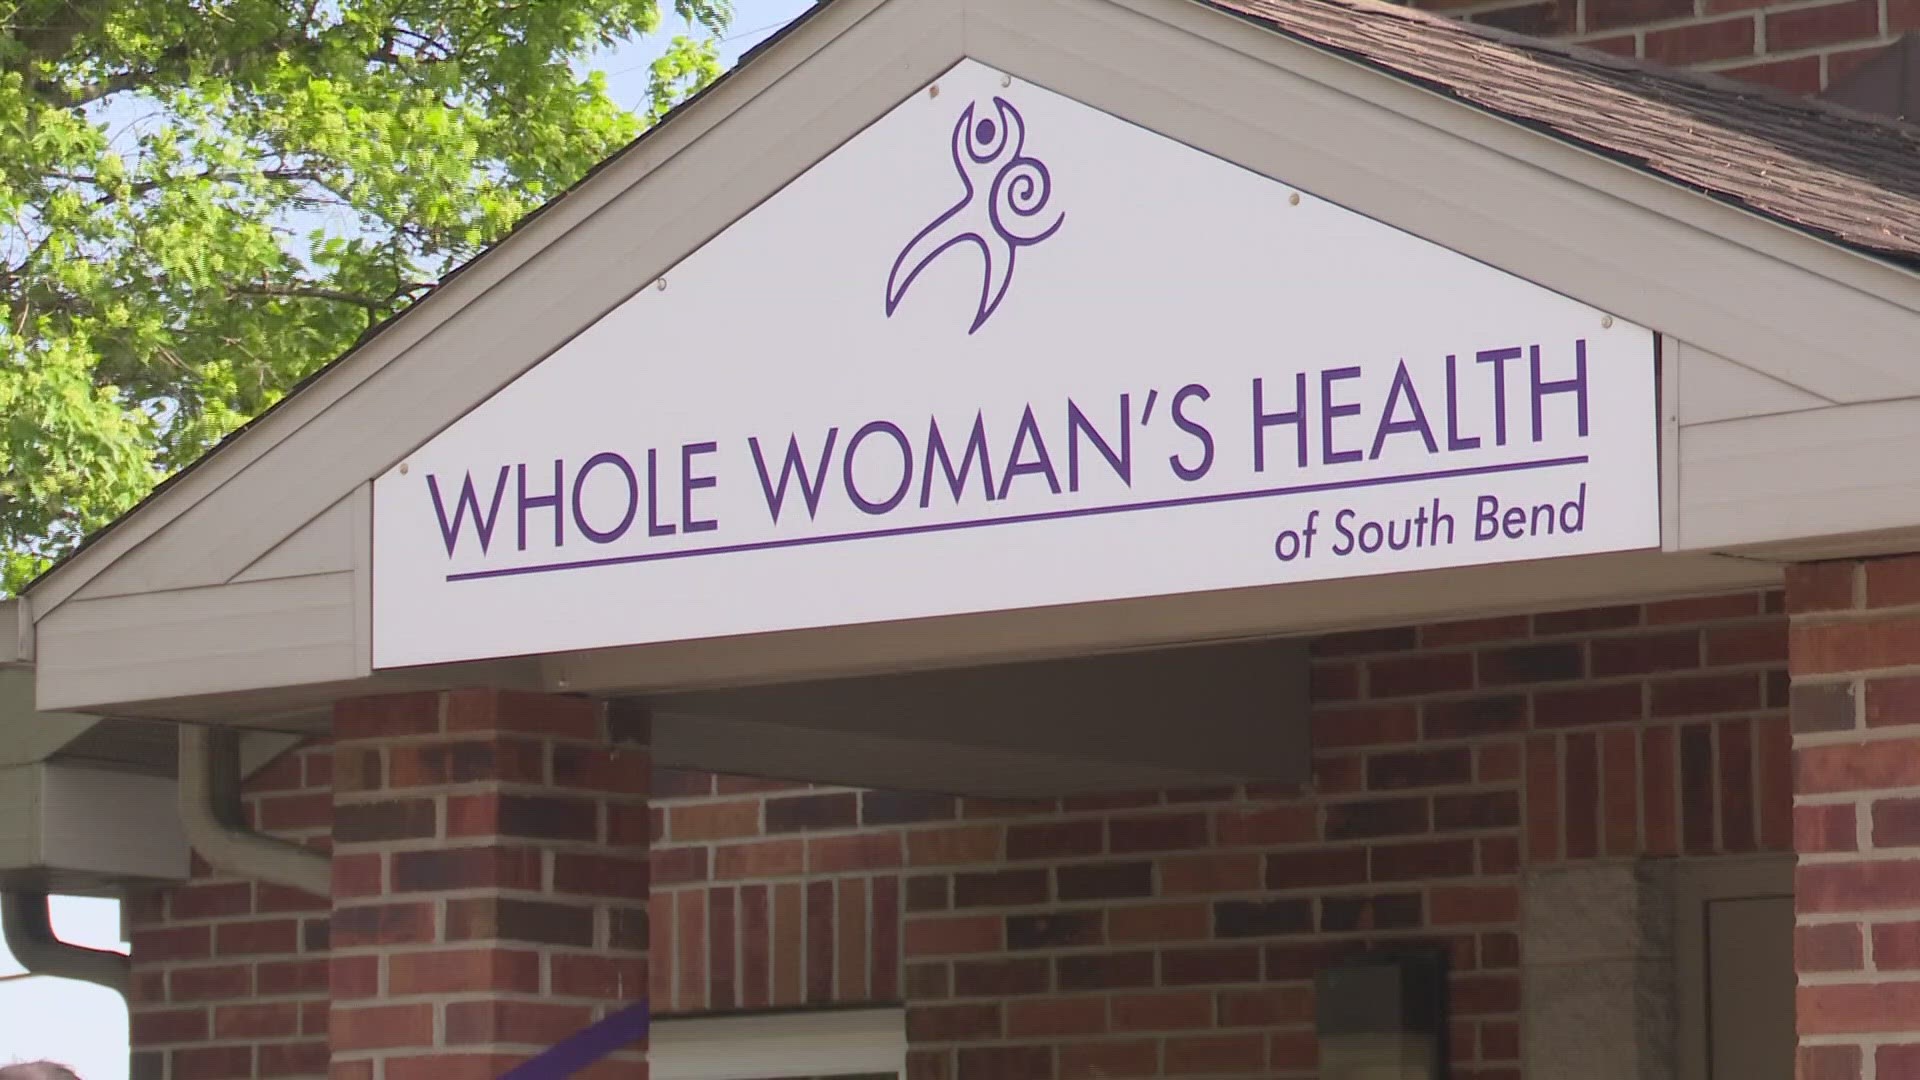 Whole Woman’s Health Alliance has seen more than 1,100 women for medication abortions in its South Bend clinic since opening seven years ago.